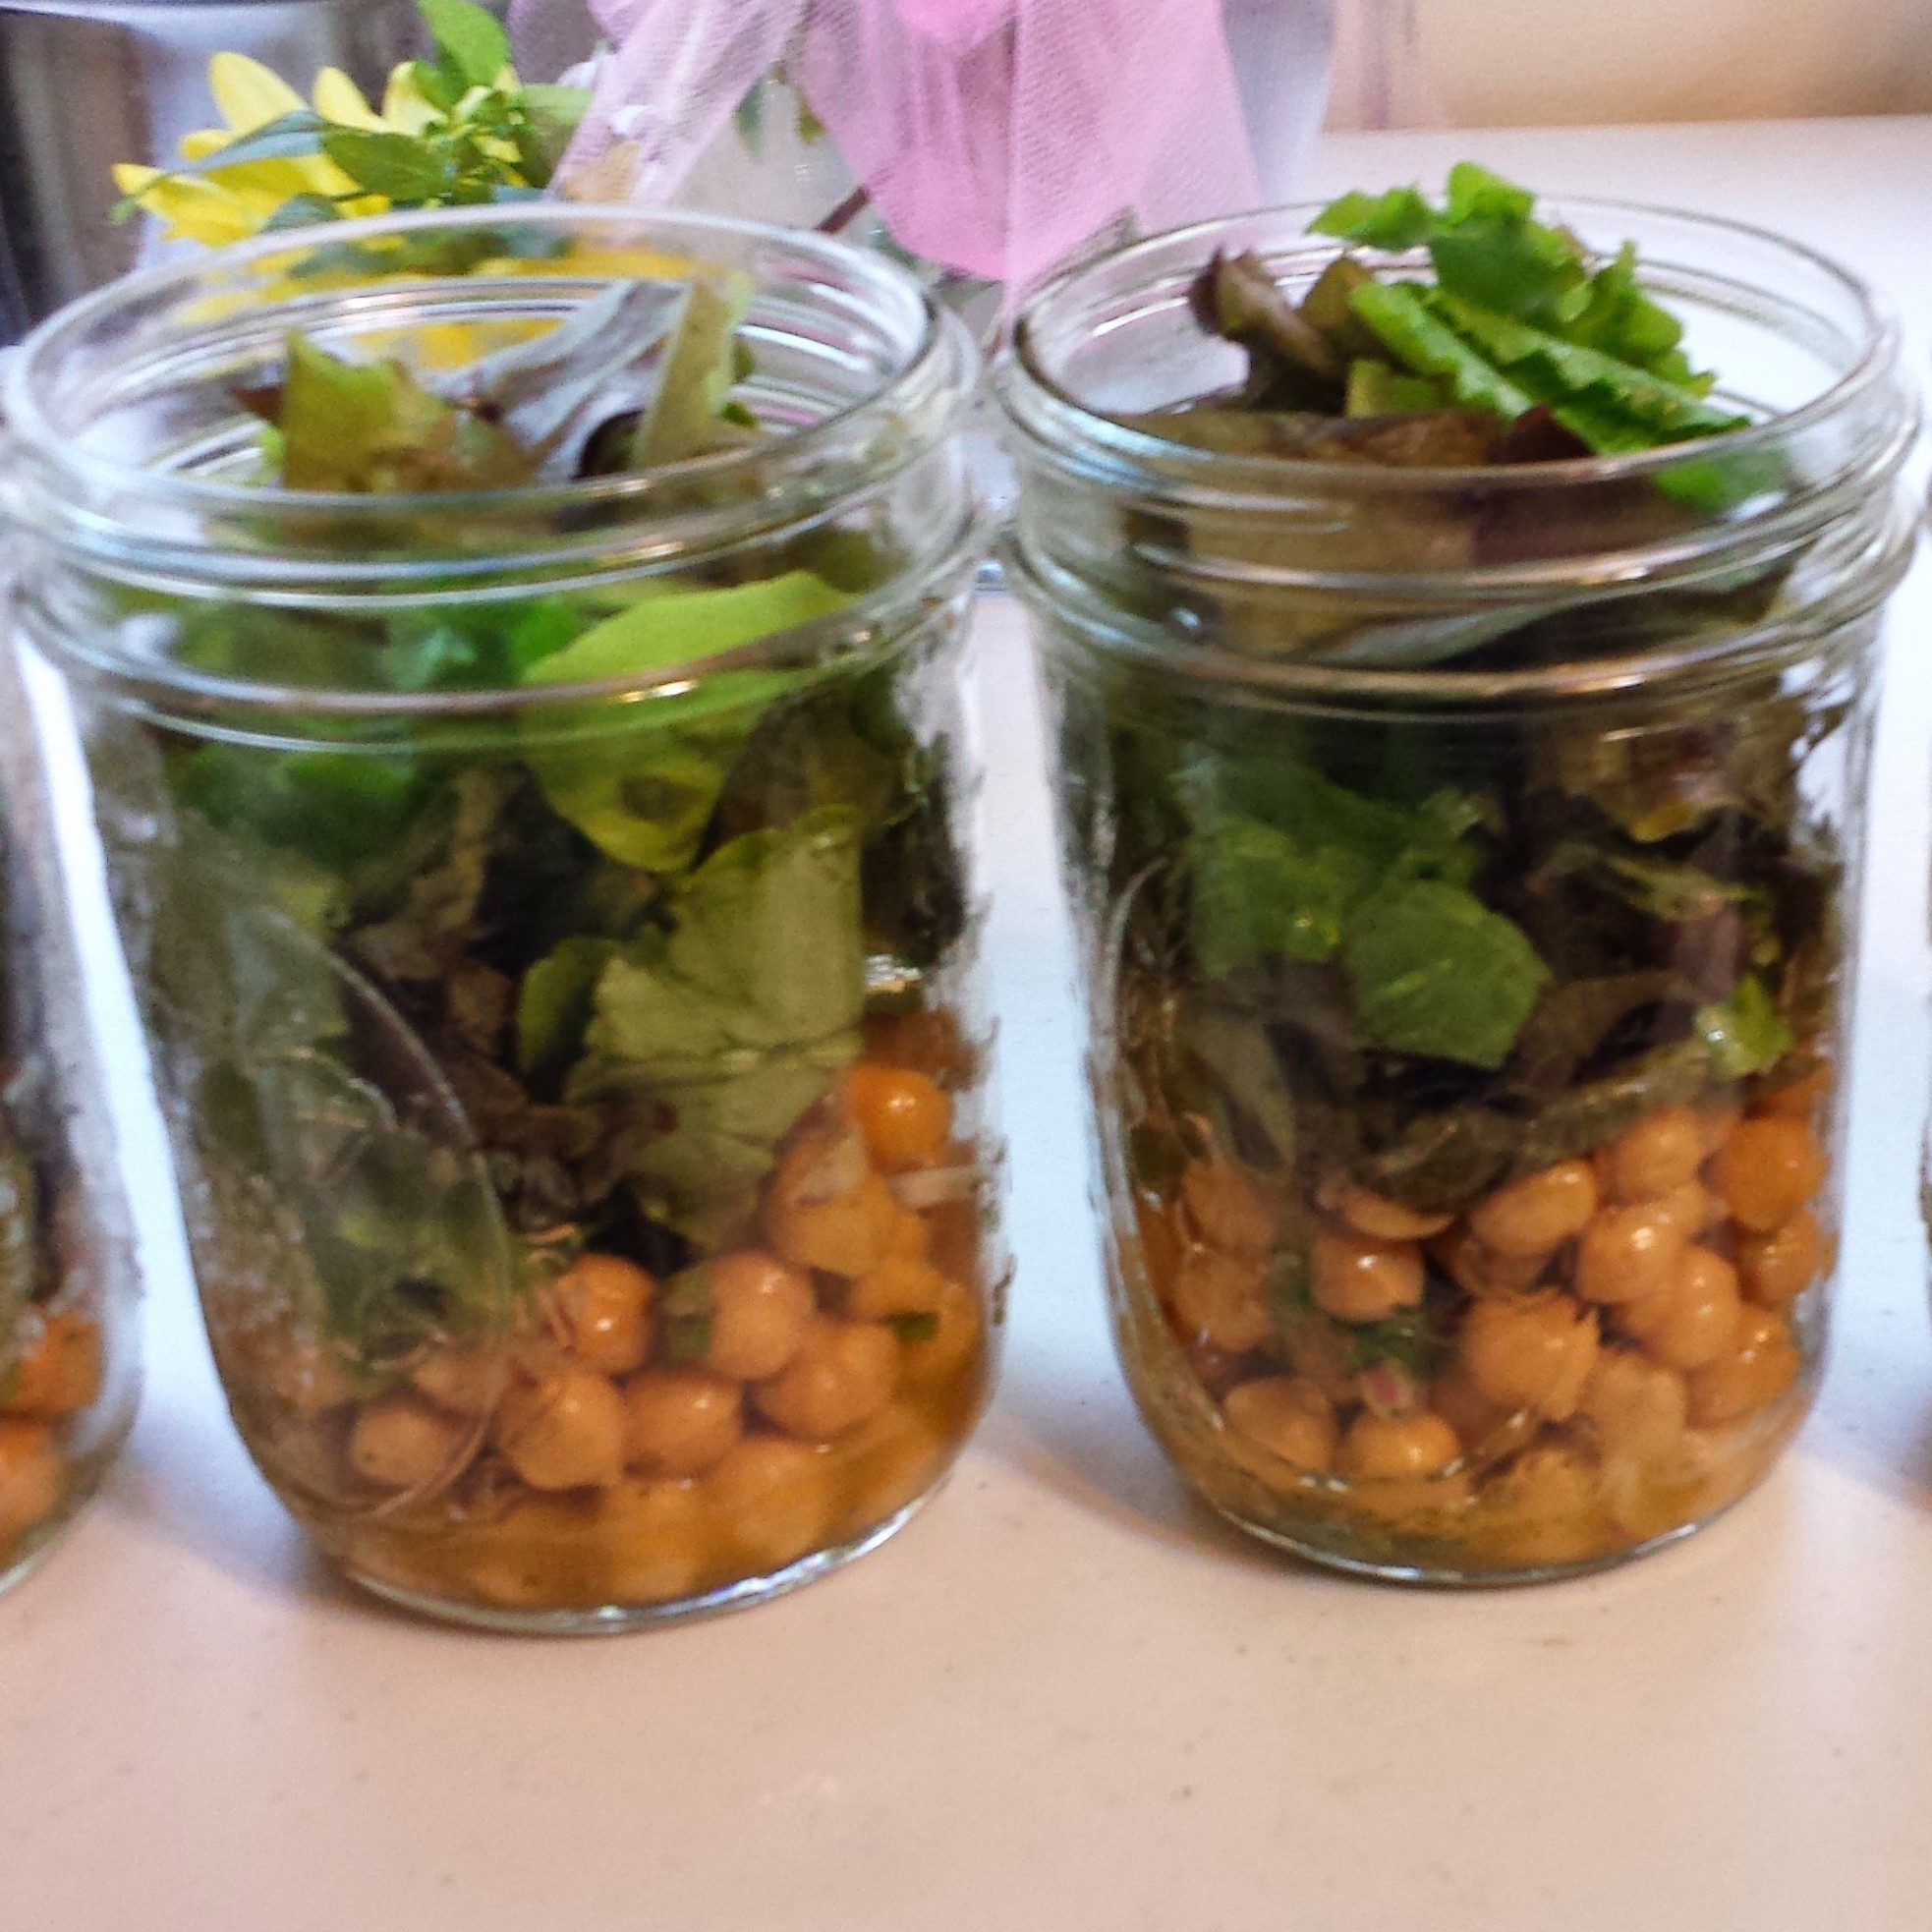 Kale Salad with Chickpeas in a Jar